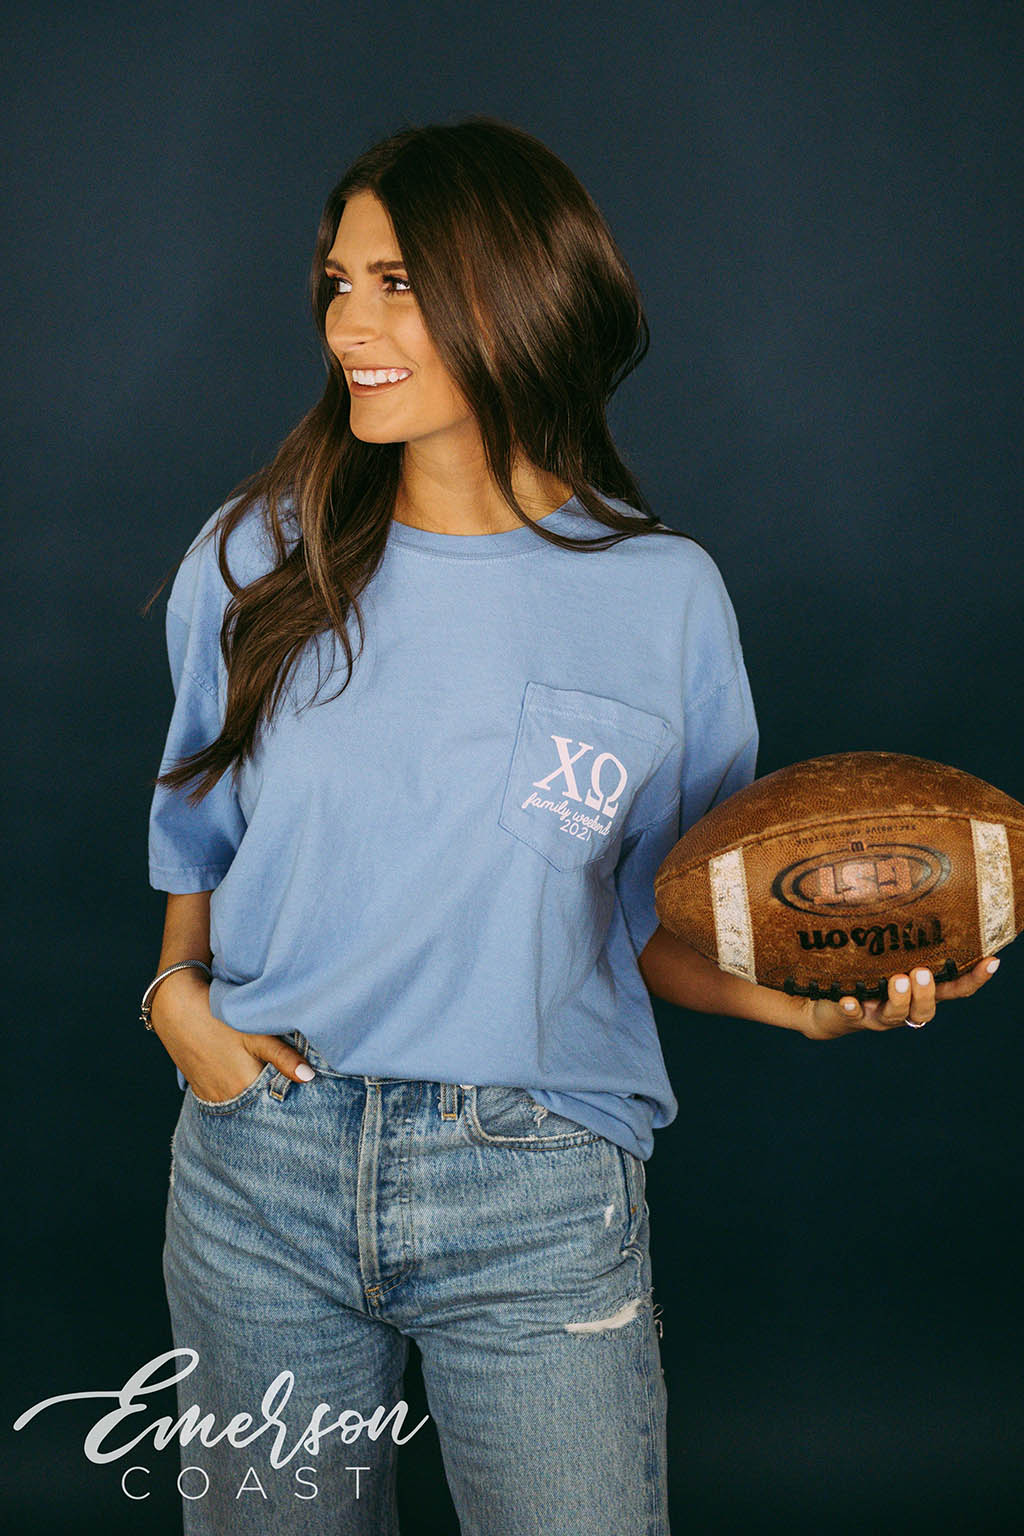 Chi Omega Map Family Weekend Tee